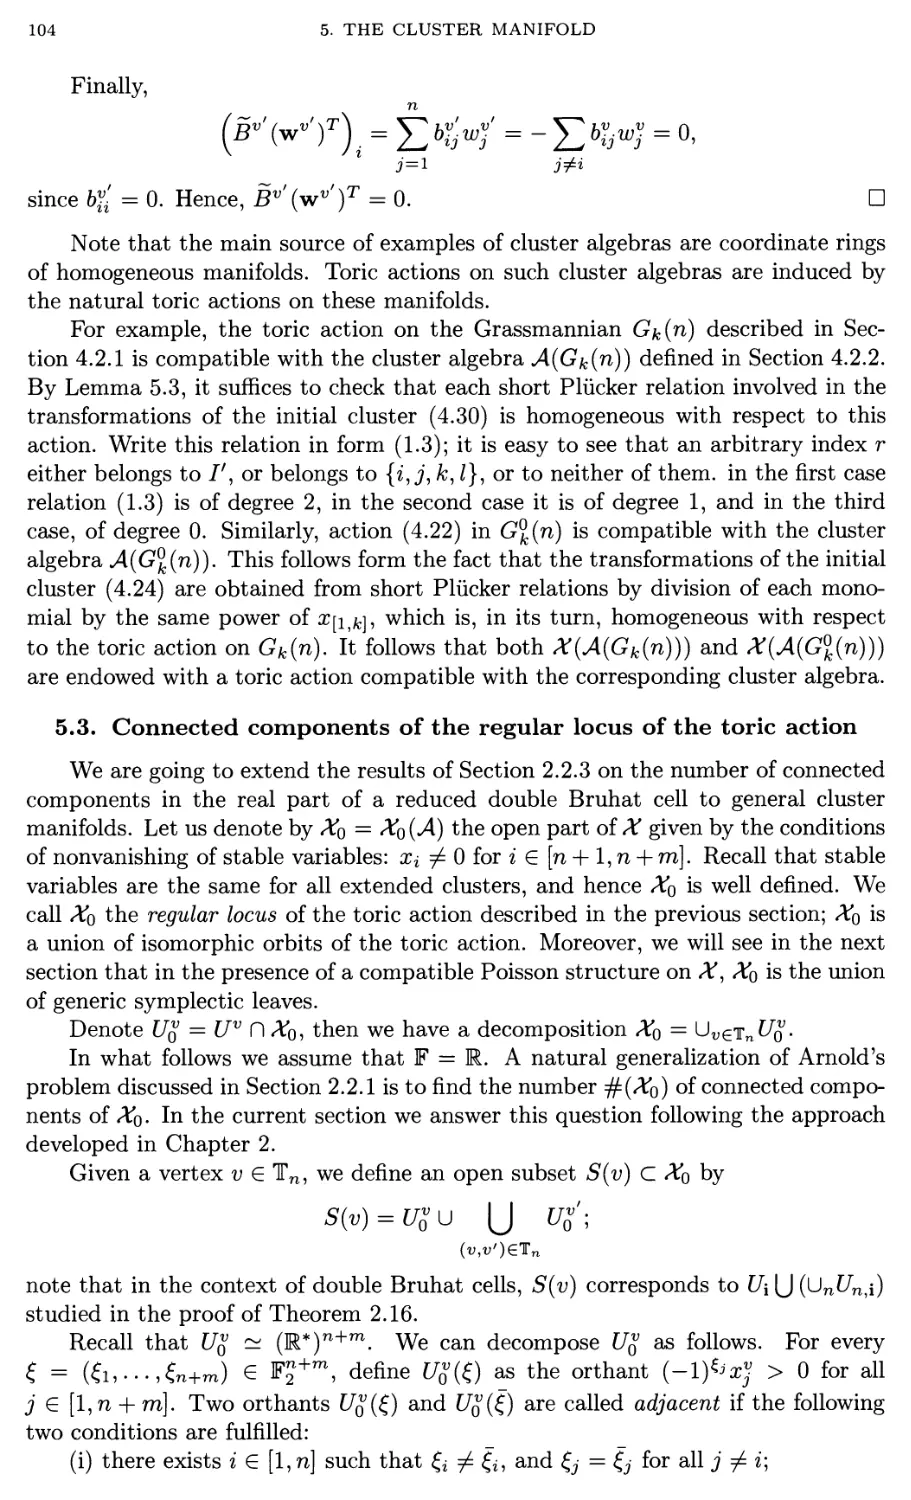 5.3. Connected components of the regular locus of the toric action 118